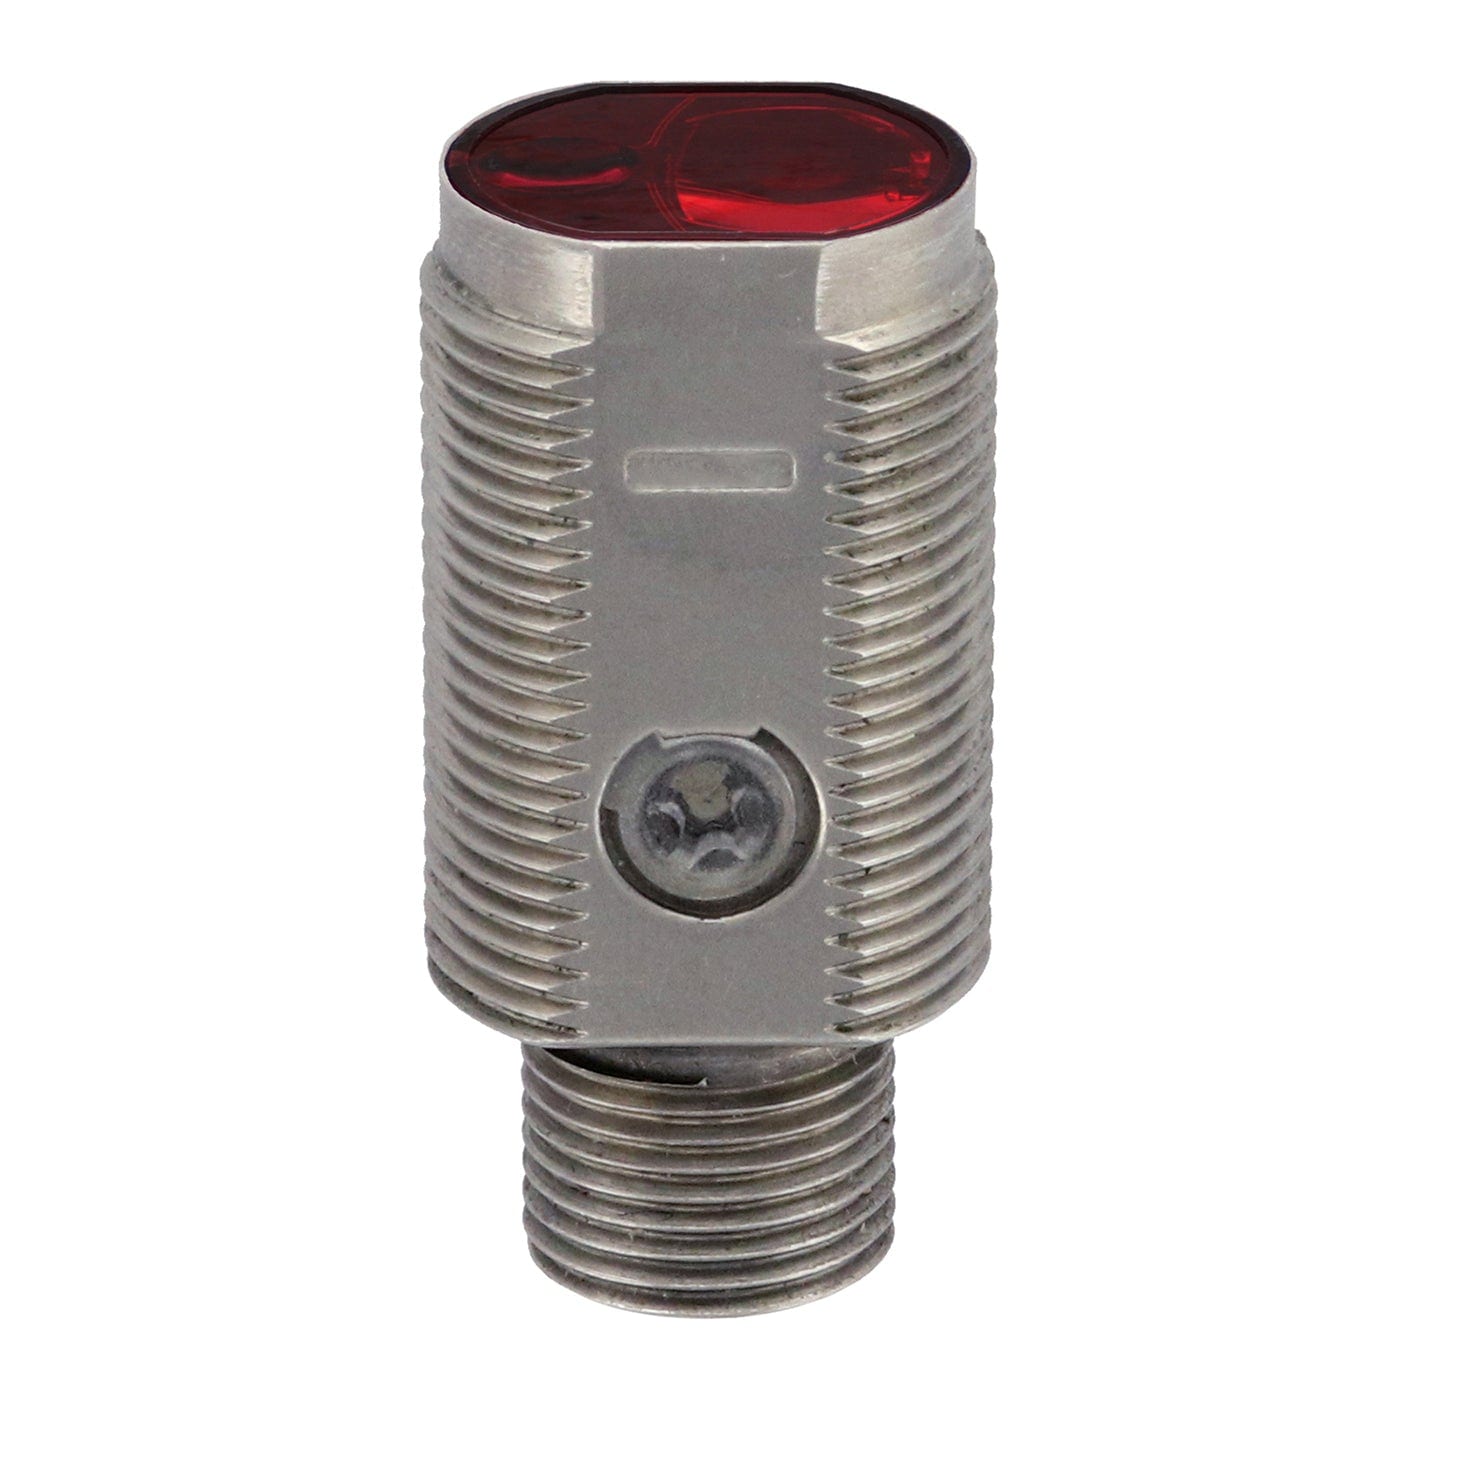 Standard Background suppression M18 15...210 mm Stainless steel V2A 3/4 turn pot. Pinpoint LED, red 640 nm